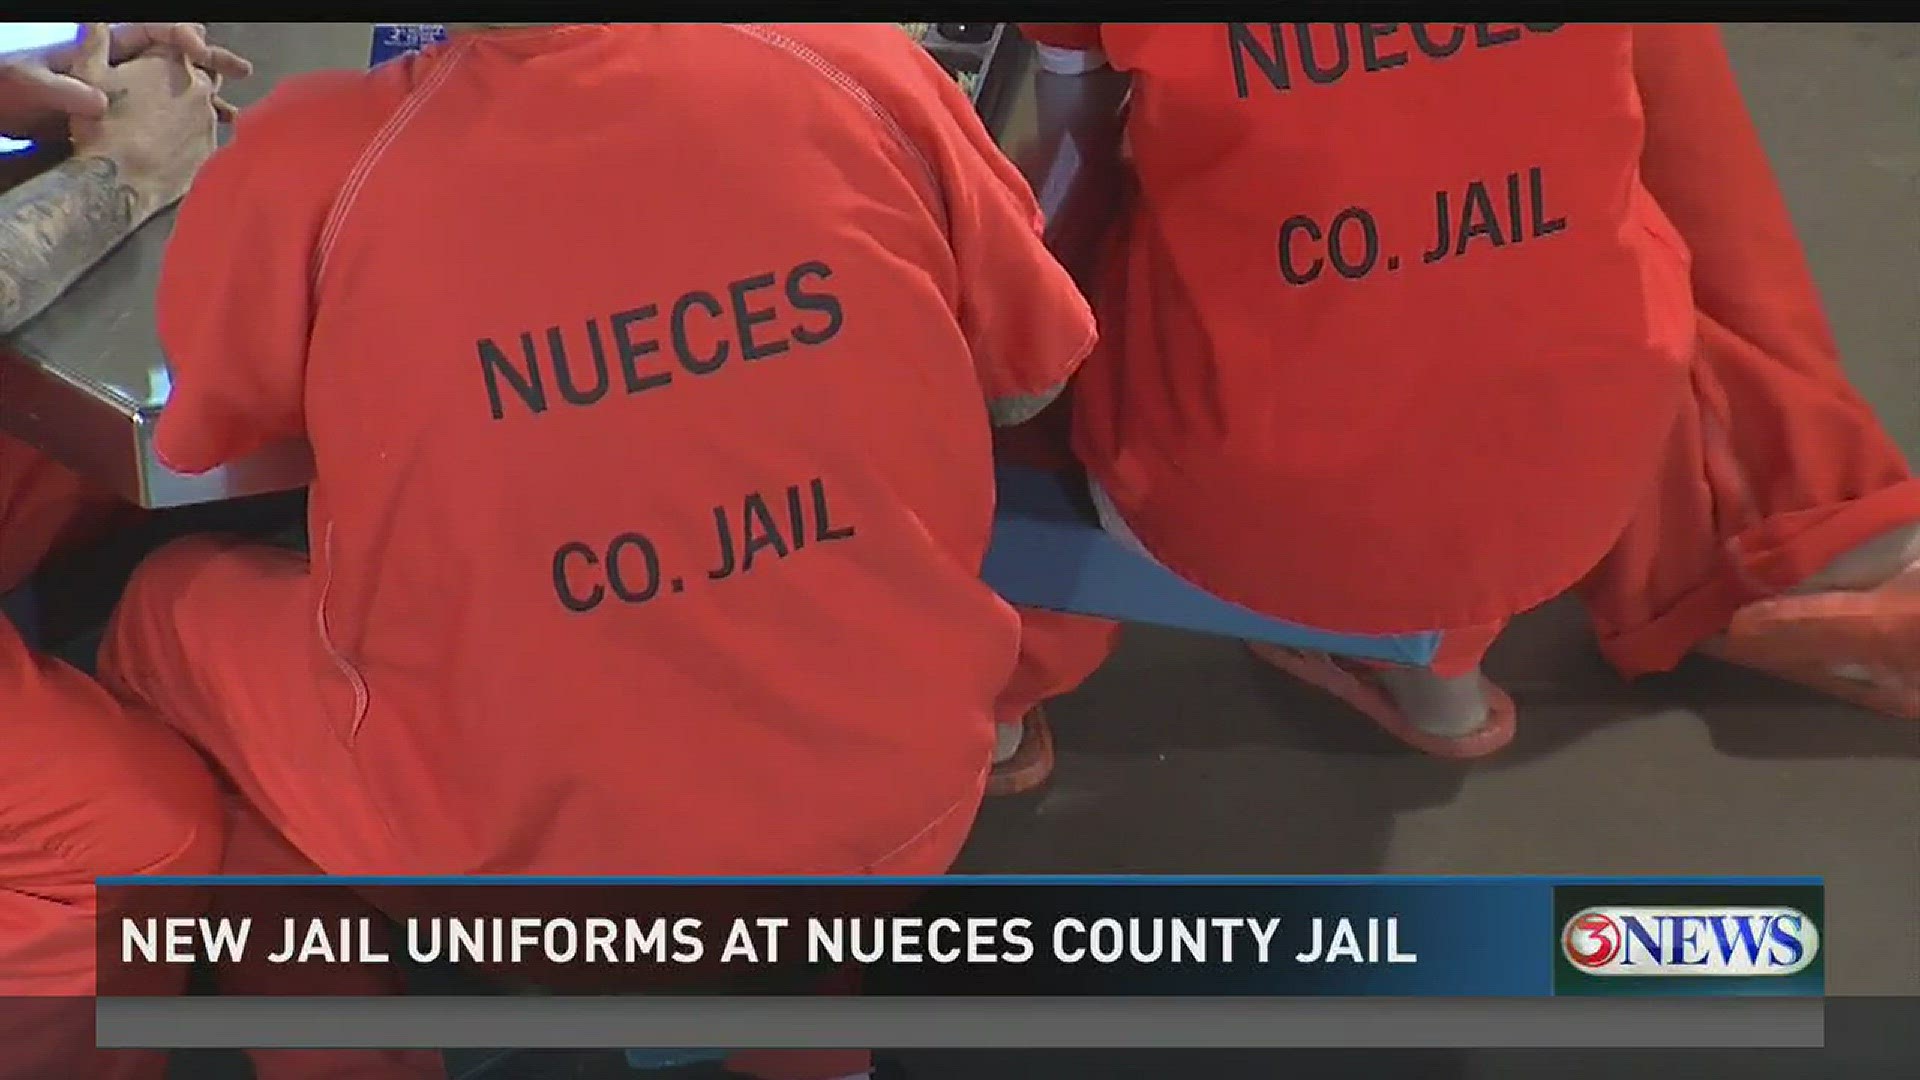 It's the first day of fall, and those fall colors are already at the Nueces County Jail as inmates have begun to wear new uniforms -- orange tops and orange pants.